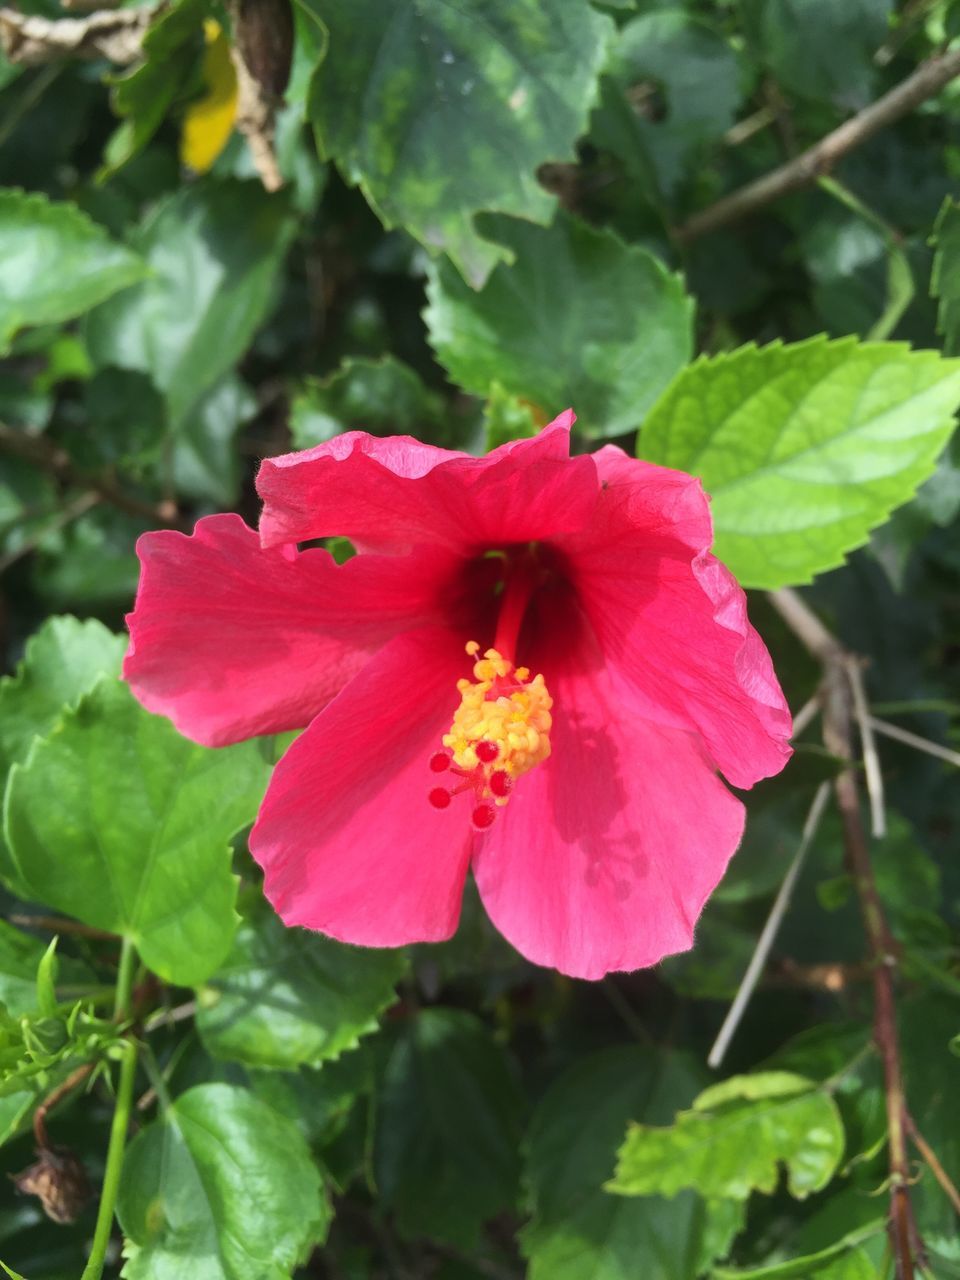 CLOSE-UP OF RED HIBISCUS BLOOMING IN PARK